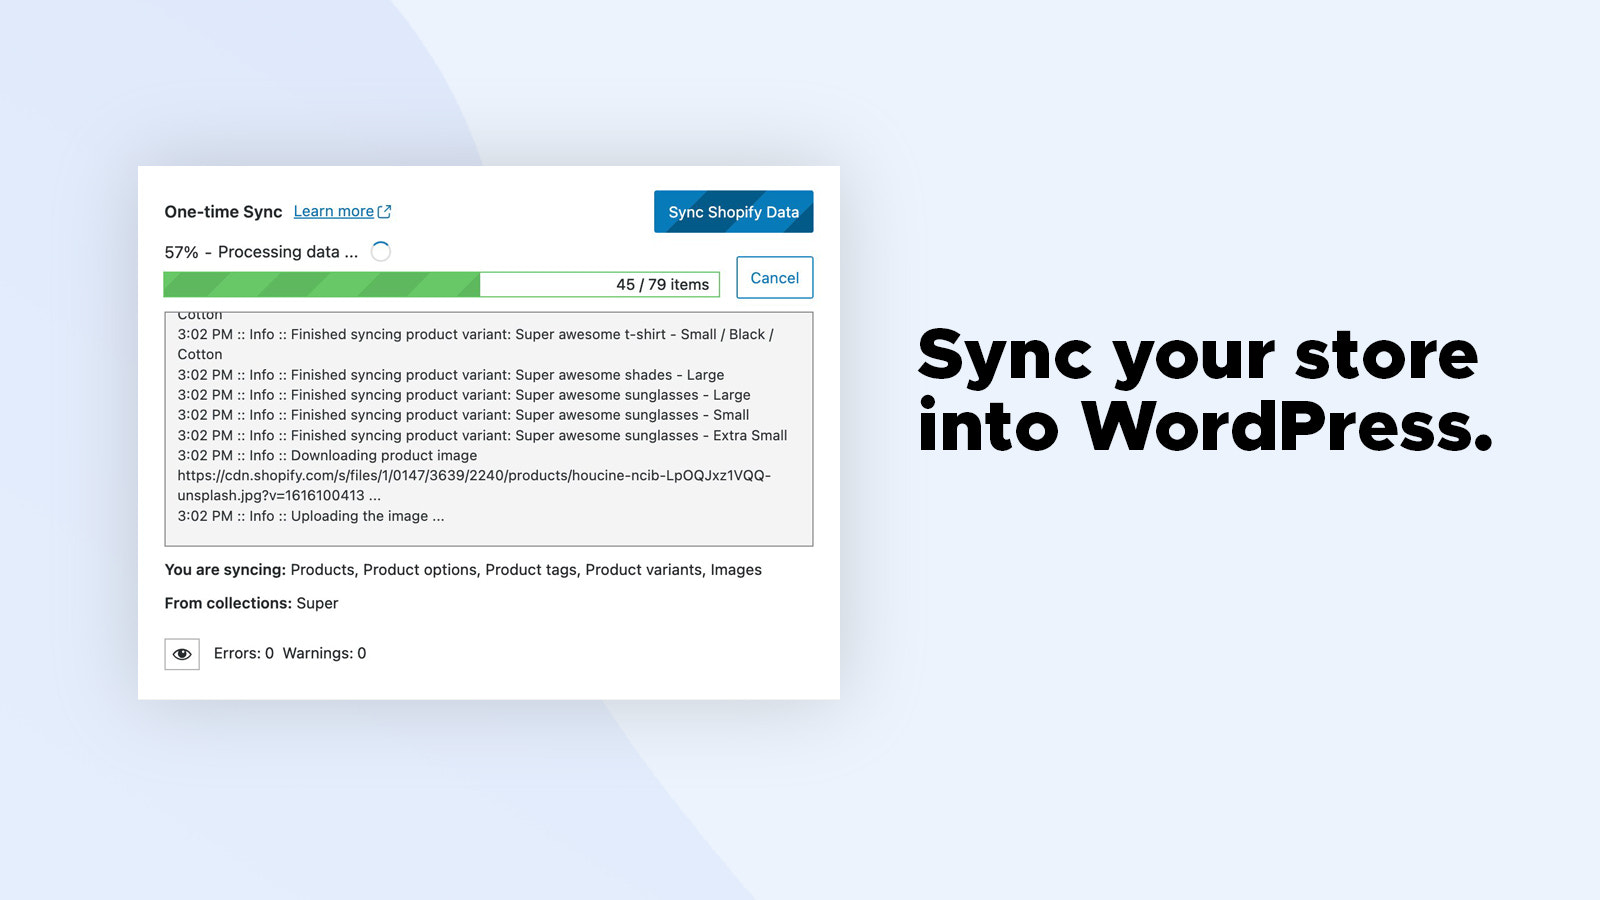 Sync your store into WordPress